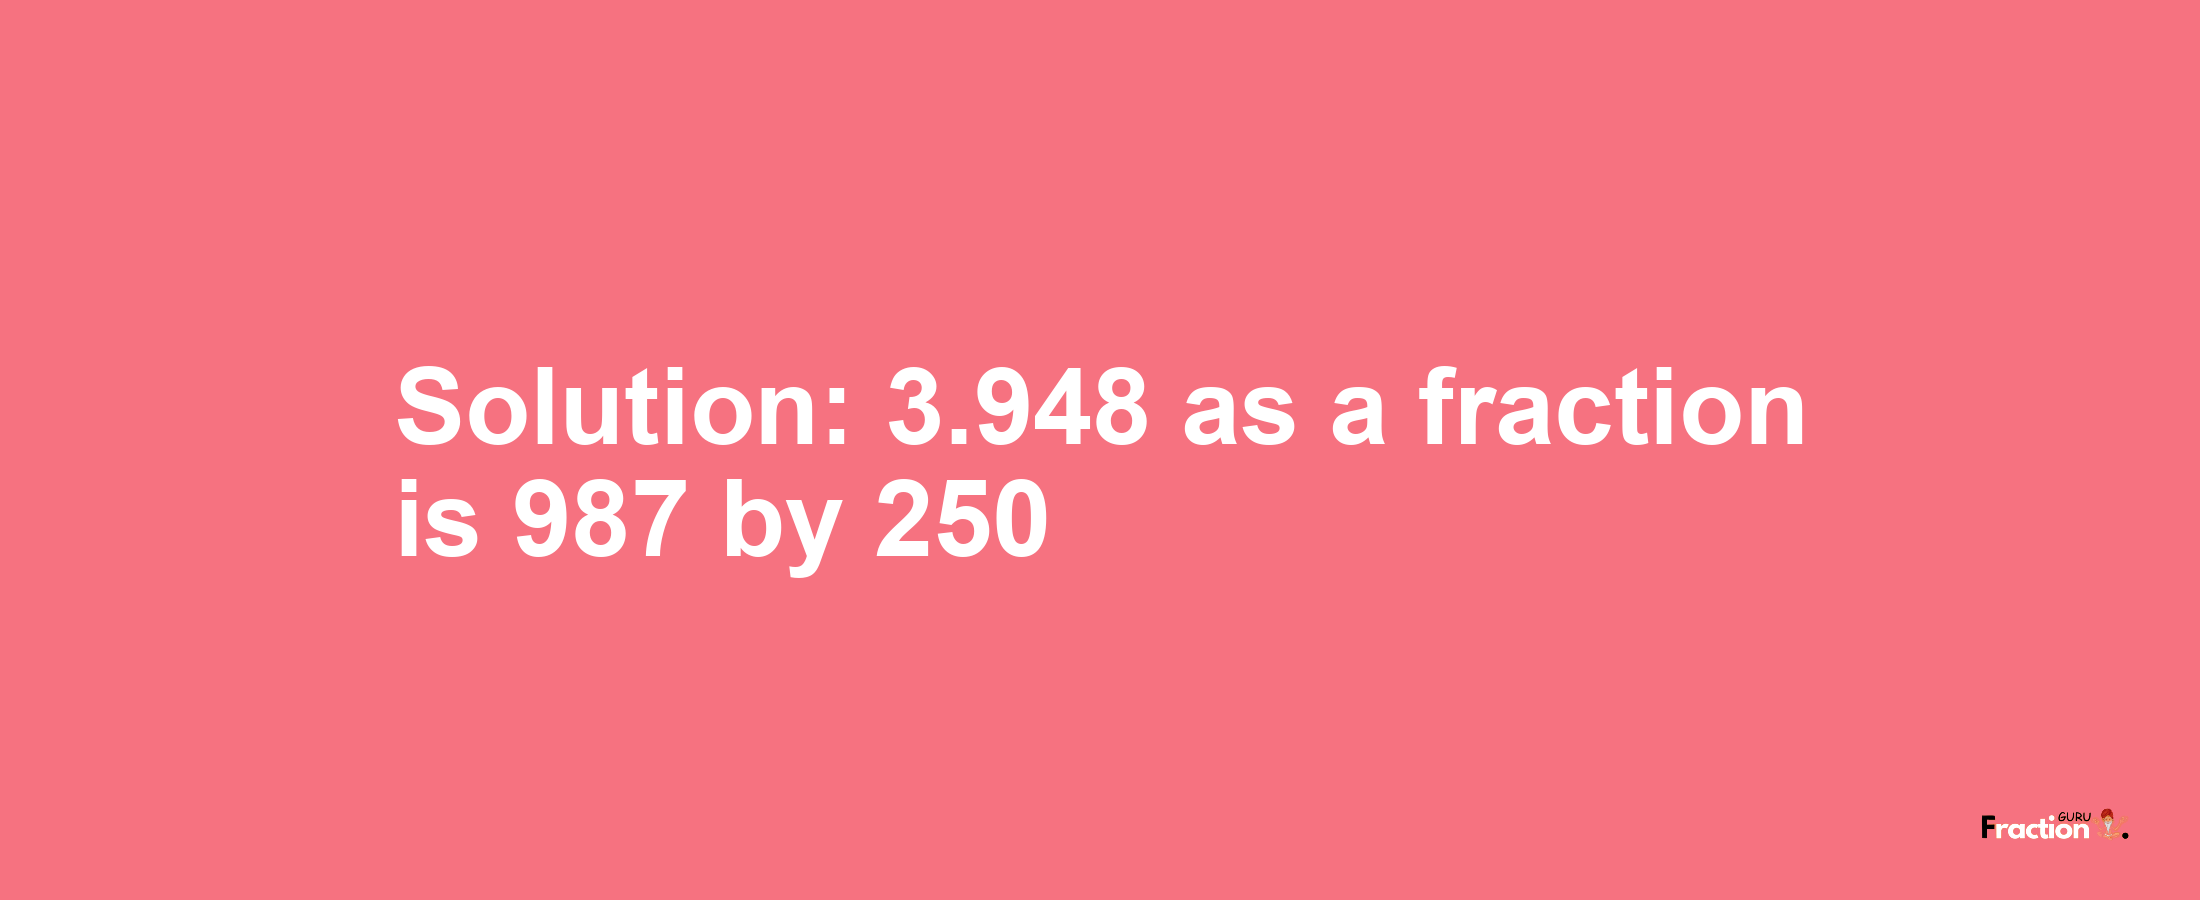 Solution:3.948 as a fraction is 987/250